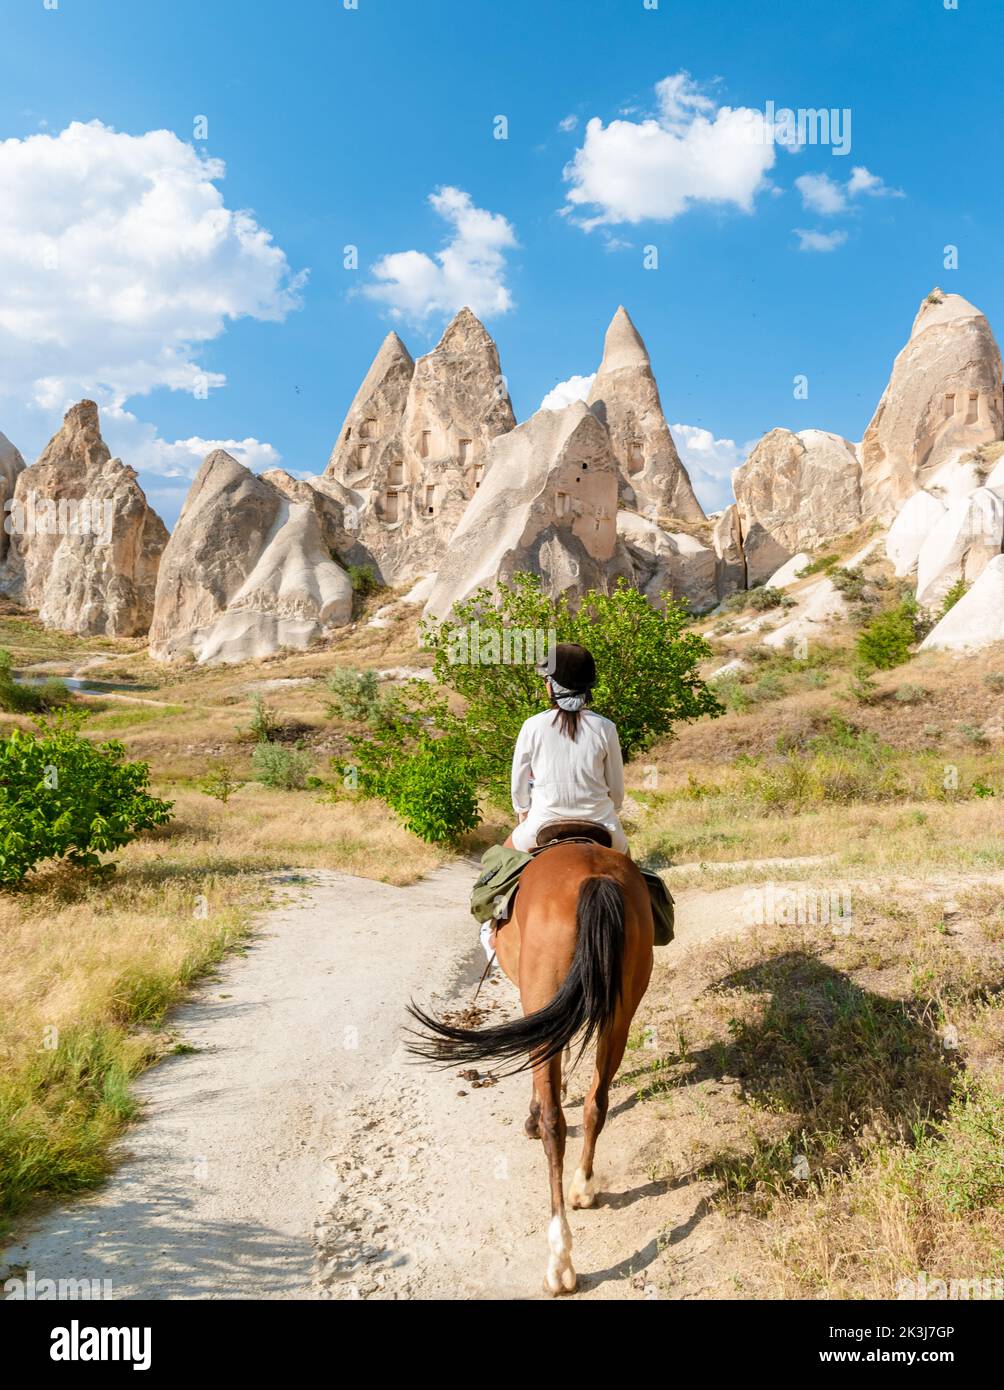 young woman during a vacation in Turkey Kapadokya watching the hot air balloons of Cappadocia. Asian women on the back of a brown horse in the valley of Cappadocia Stock Photo